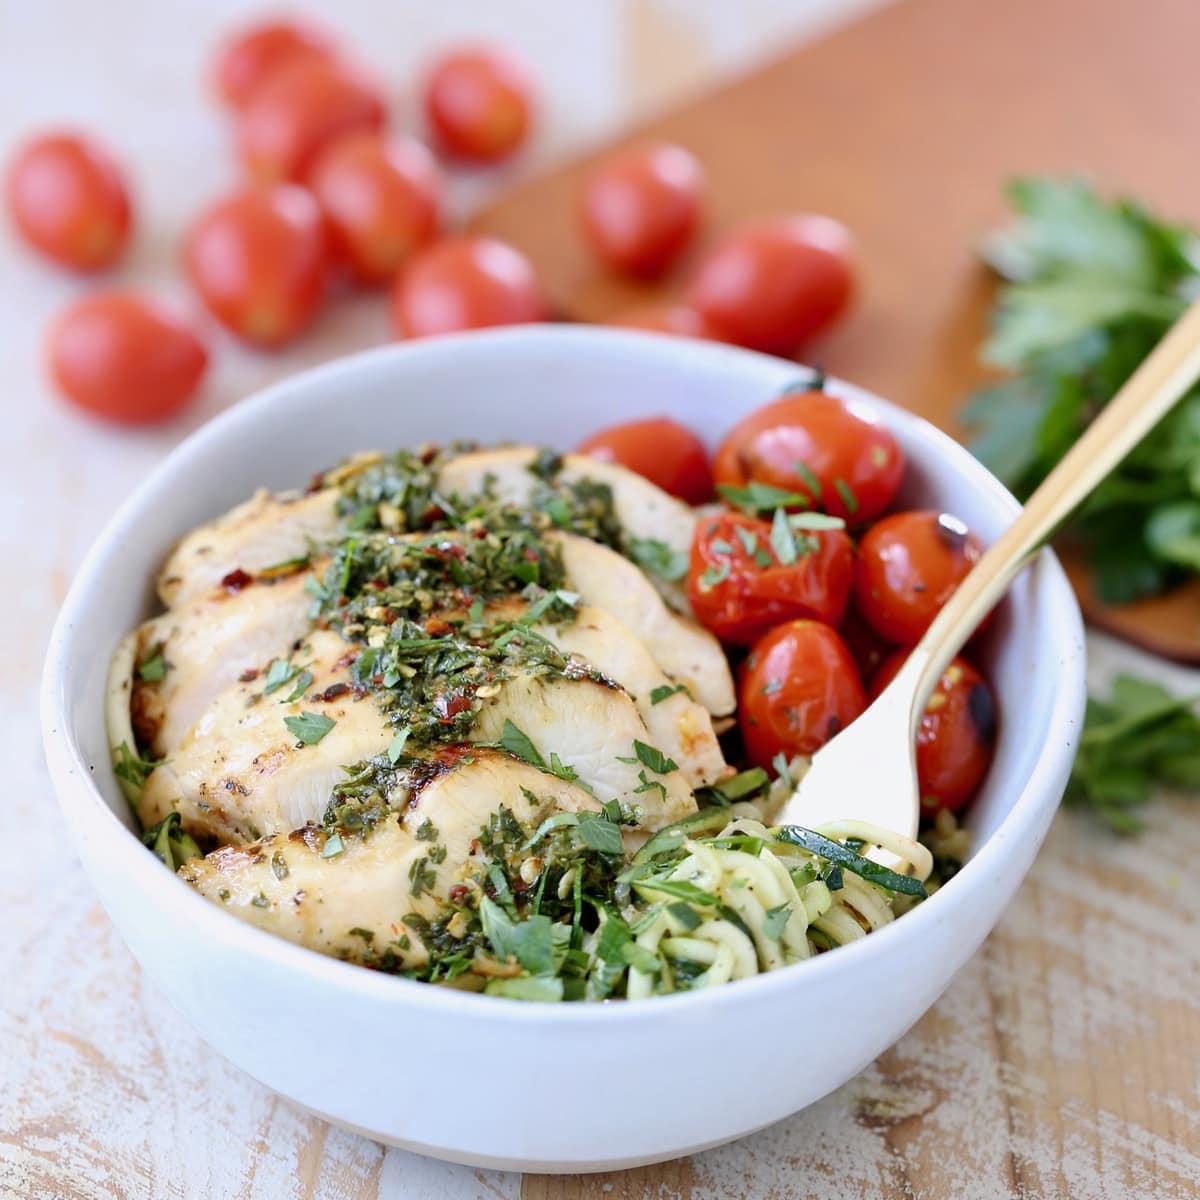 Zucchini Noodles in Gold Fork with Grilled Chimichurri Chicken and Roasted Cherry Tomatoes